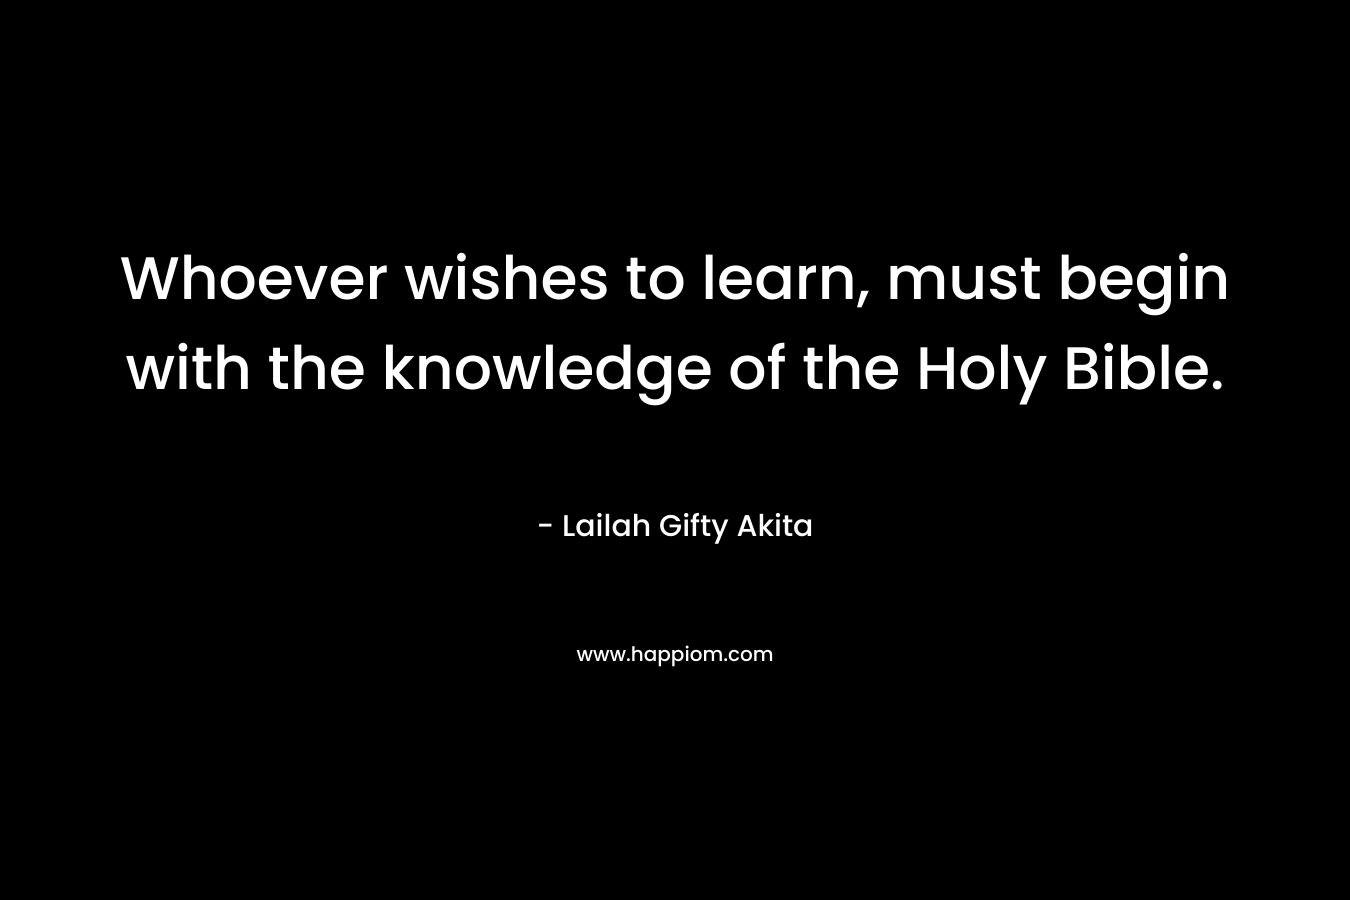 Whoever wishes to learn, must begin with the knowledge of the Holy Bible.